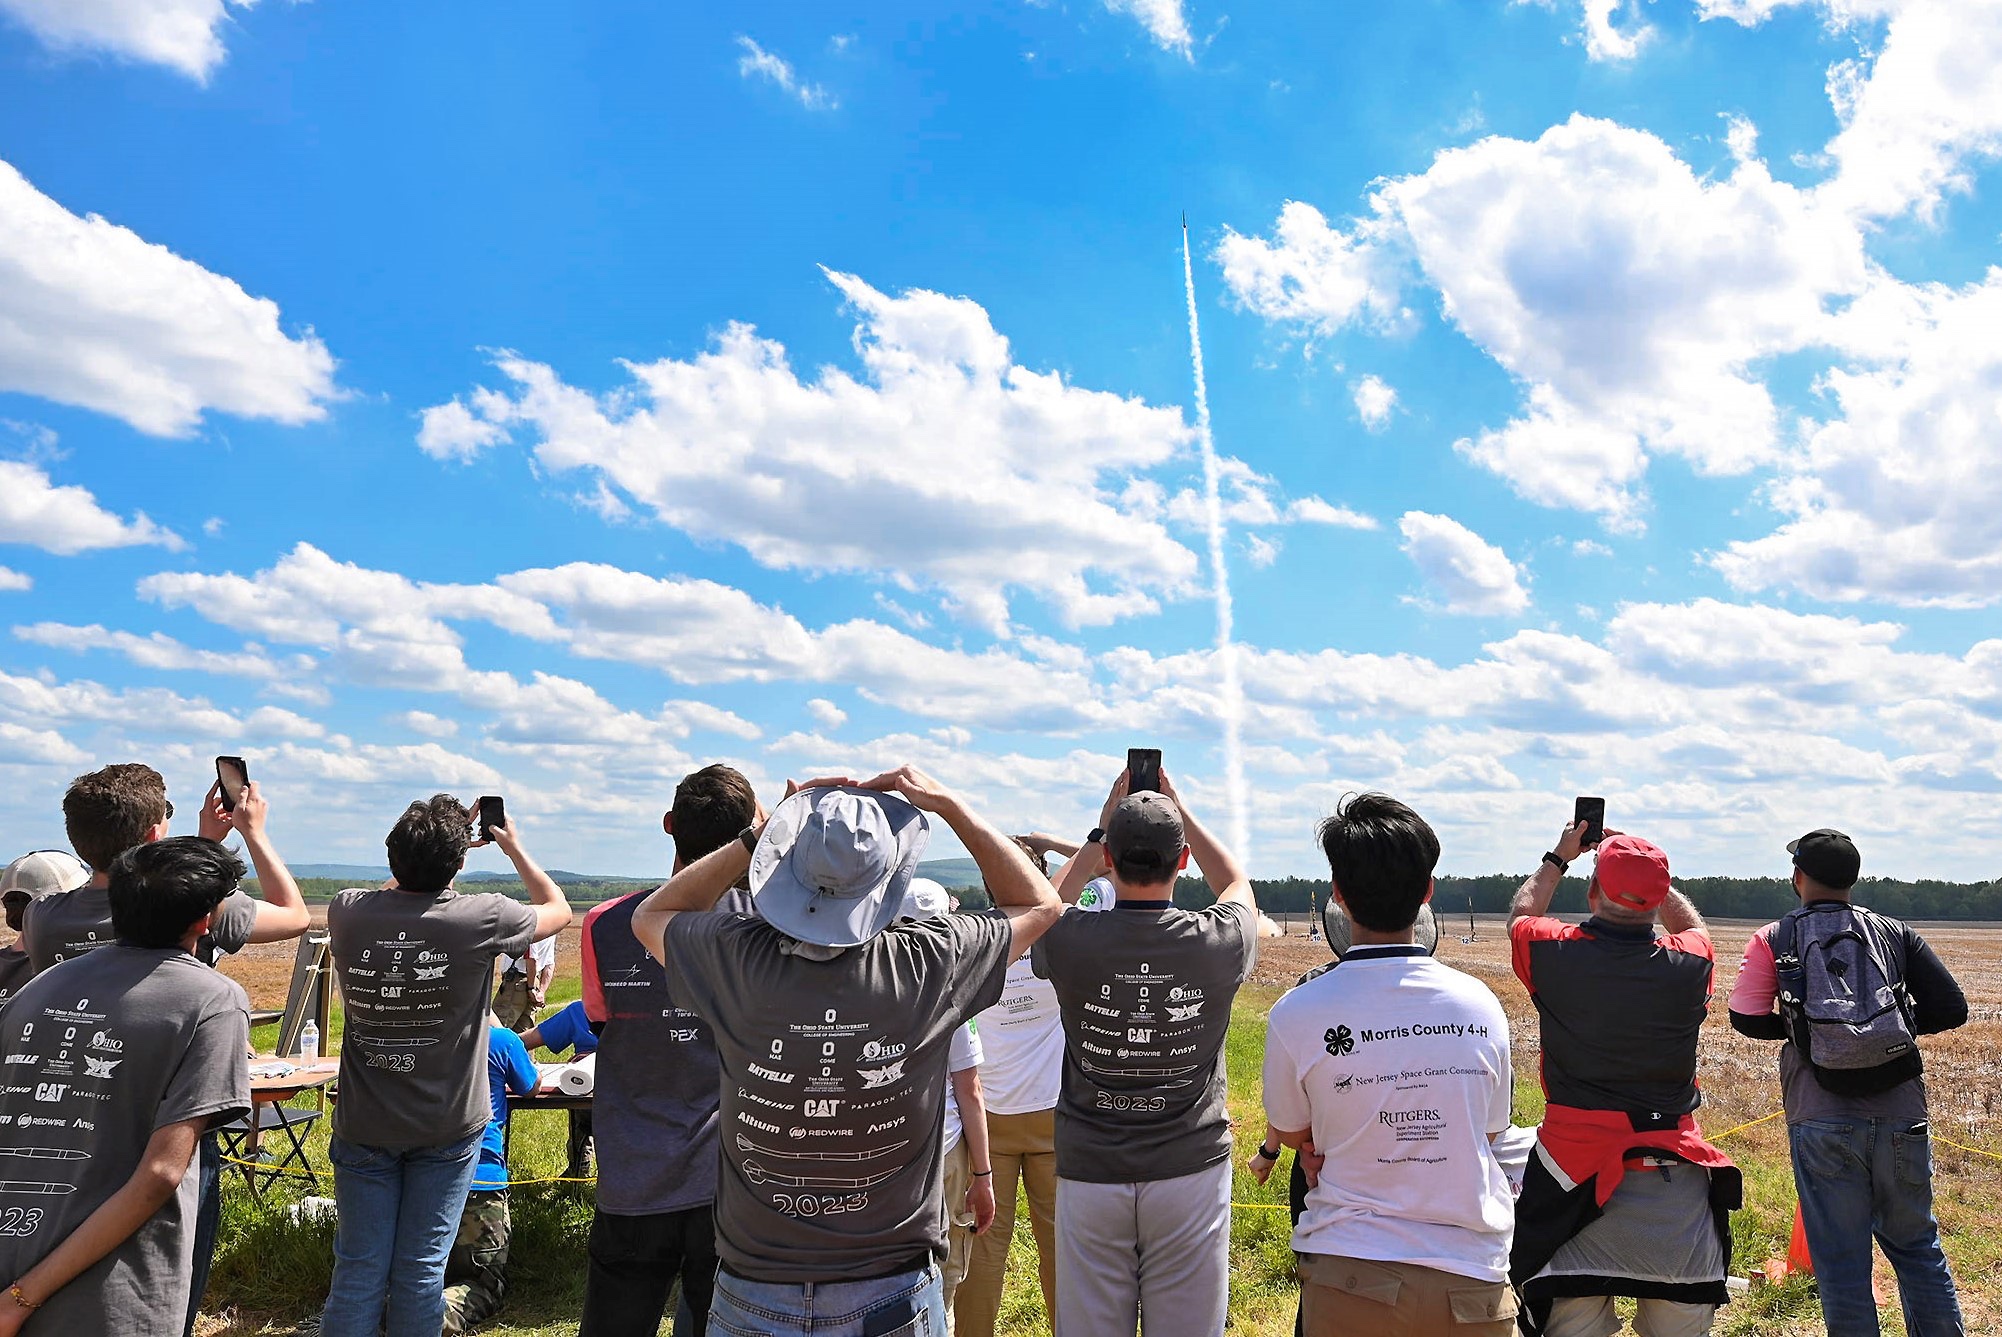 Students watch a high-powered amateur rocket launch during NASA’s 2023 Student Launch competition near NASA’s Marshall Space Flight Center in Huntsville, Alabama.